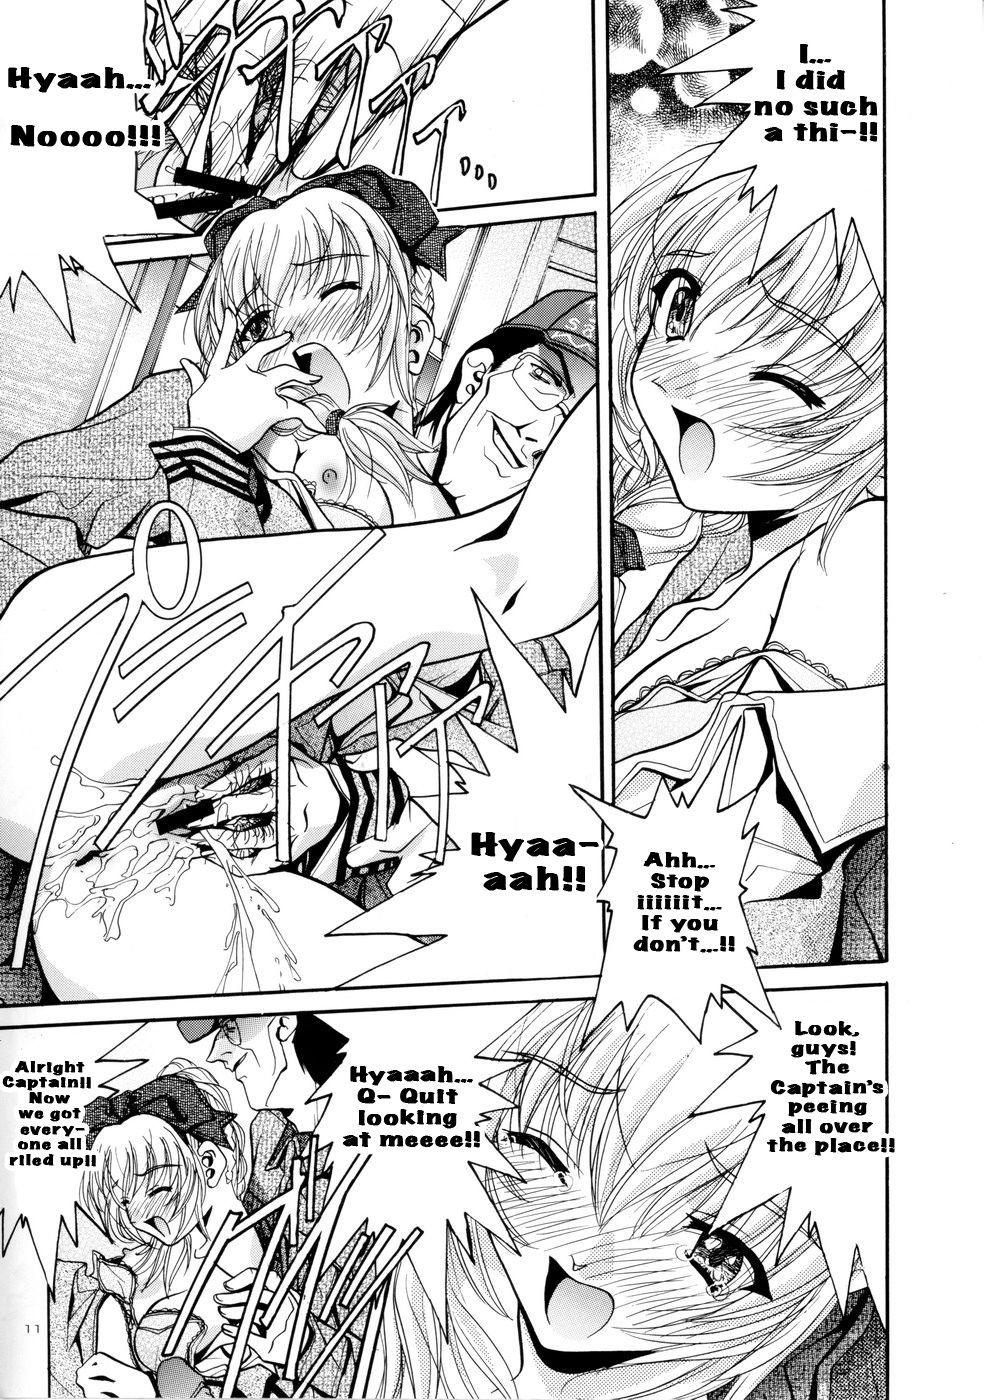 Gay Shop Rin - Full metal panic Small Boobs - Page 11